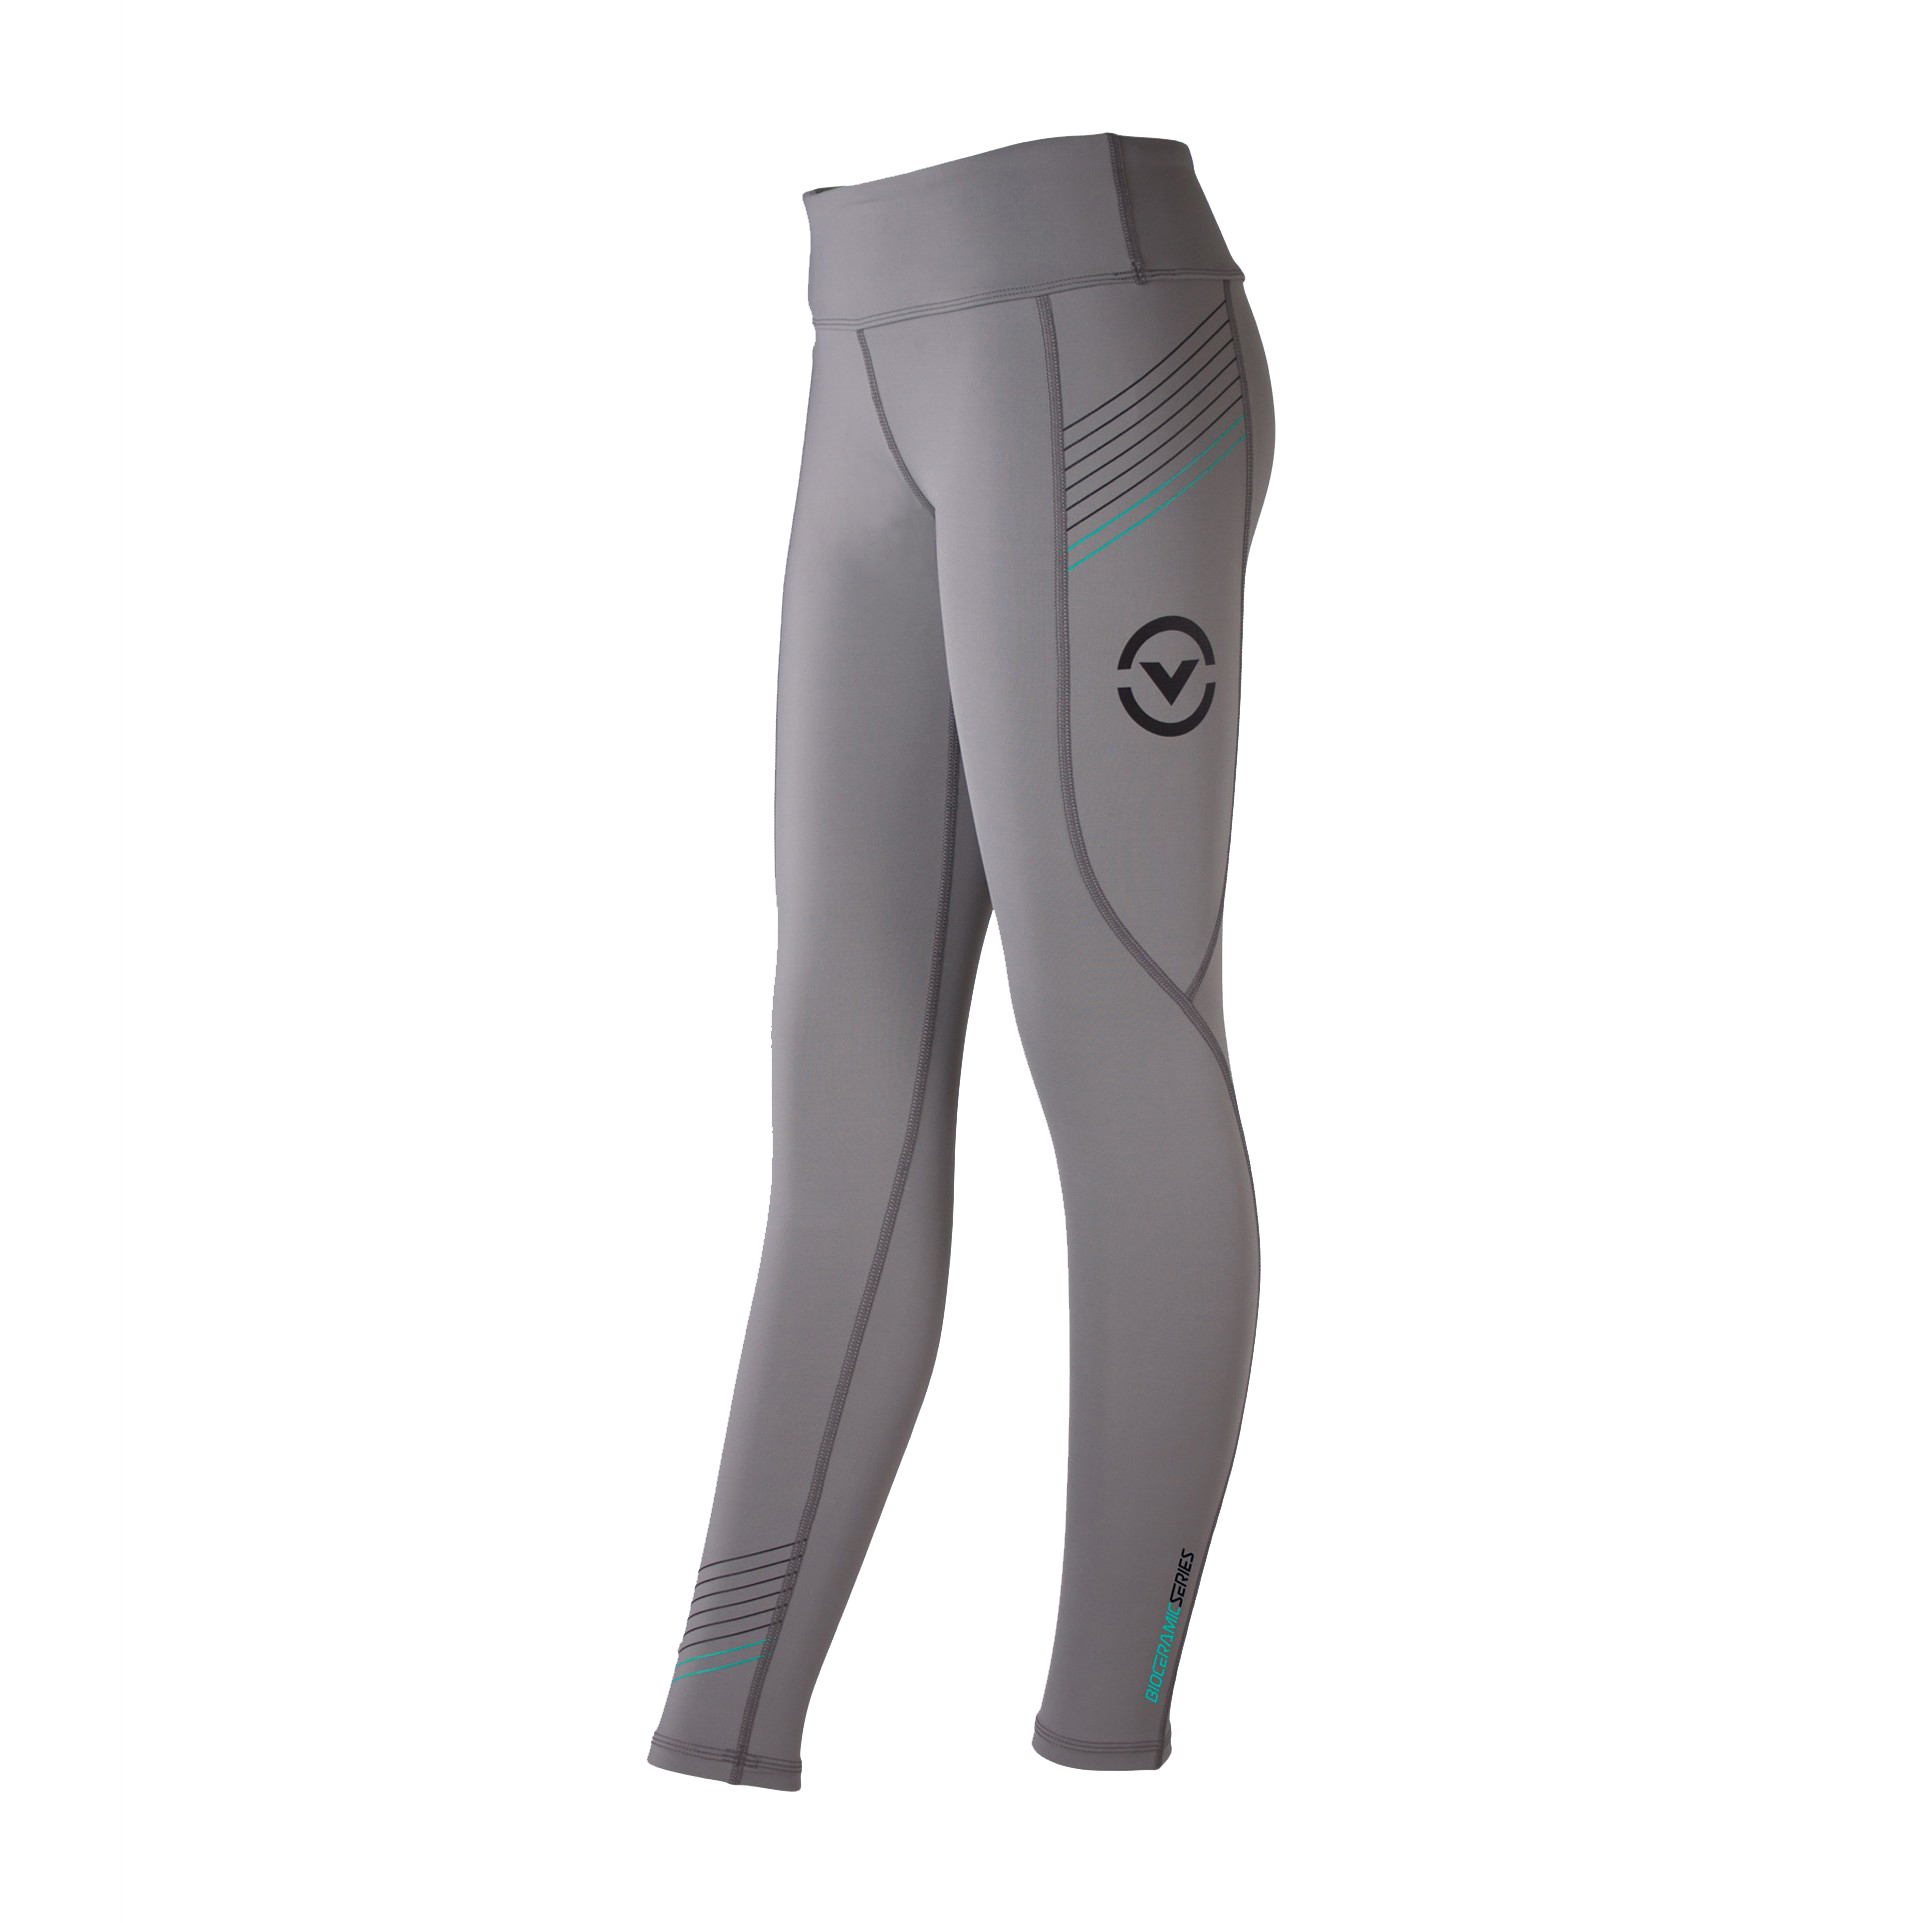 Women's 2016 Base Layers: Sleek and Supportive, Virus Compression pant